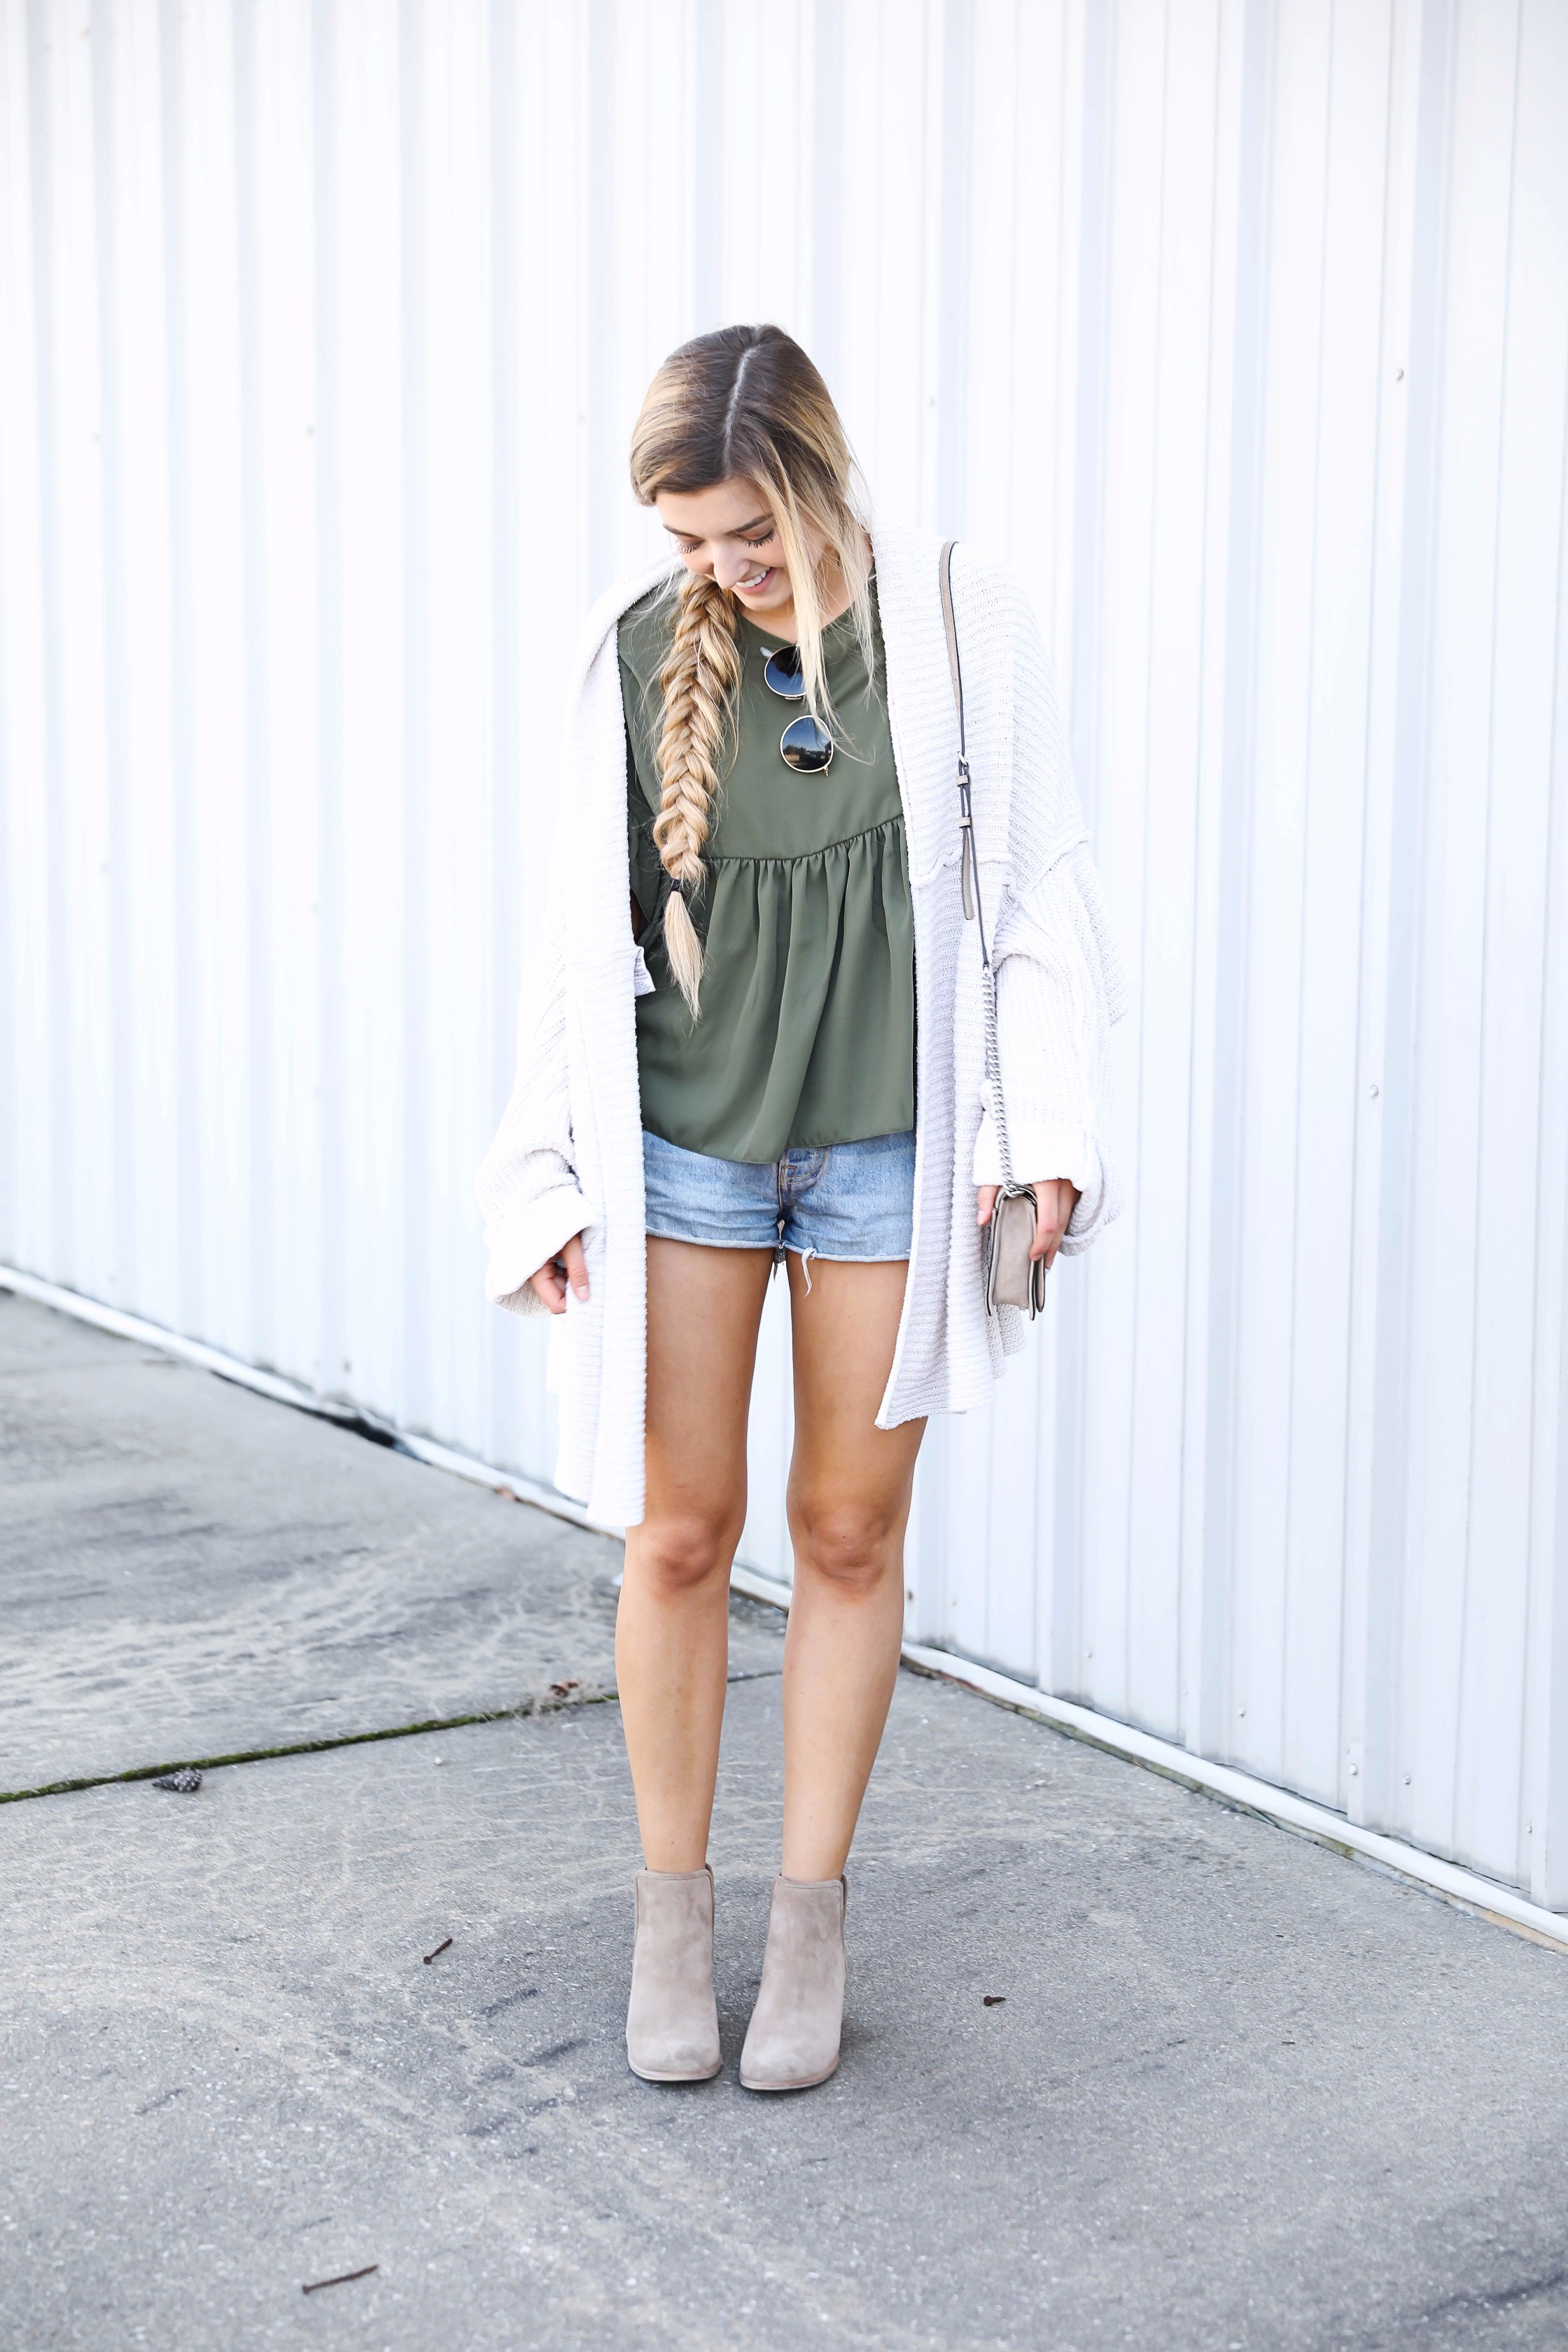 Olive ruffle top with a free people slouchy cardigan! I love olive for fall. This look is autumn perfection with the booties! Find the details on fashion blog daily dose of charm by lauren lindmark